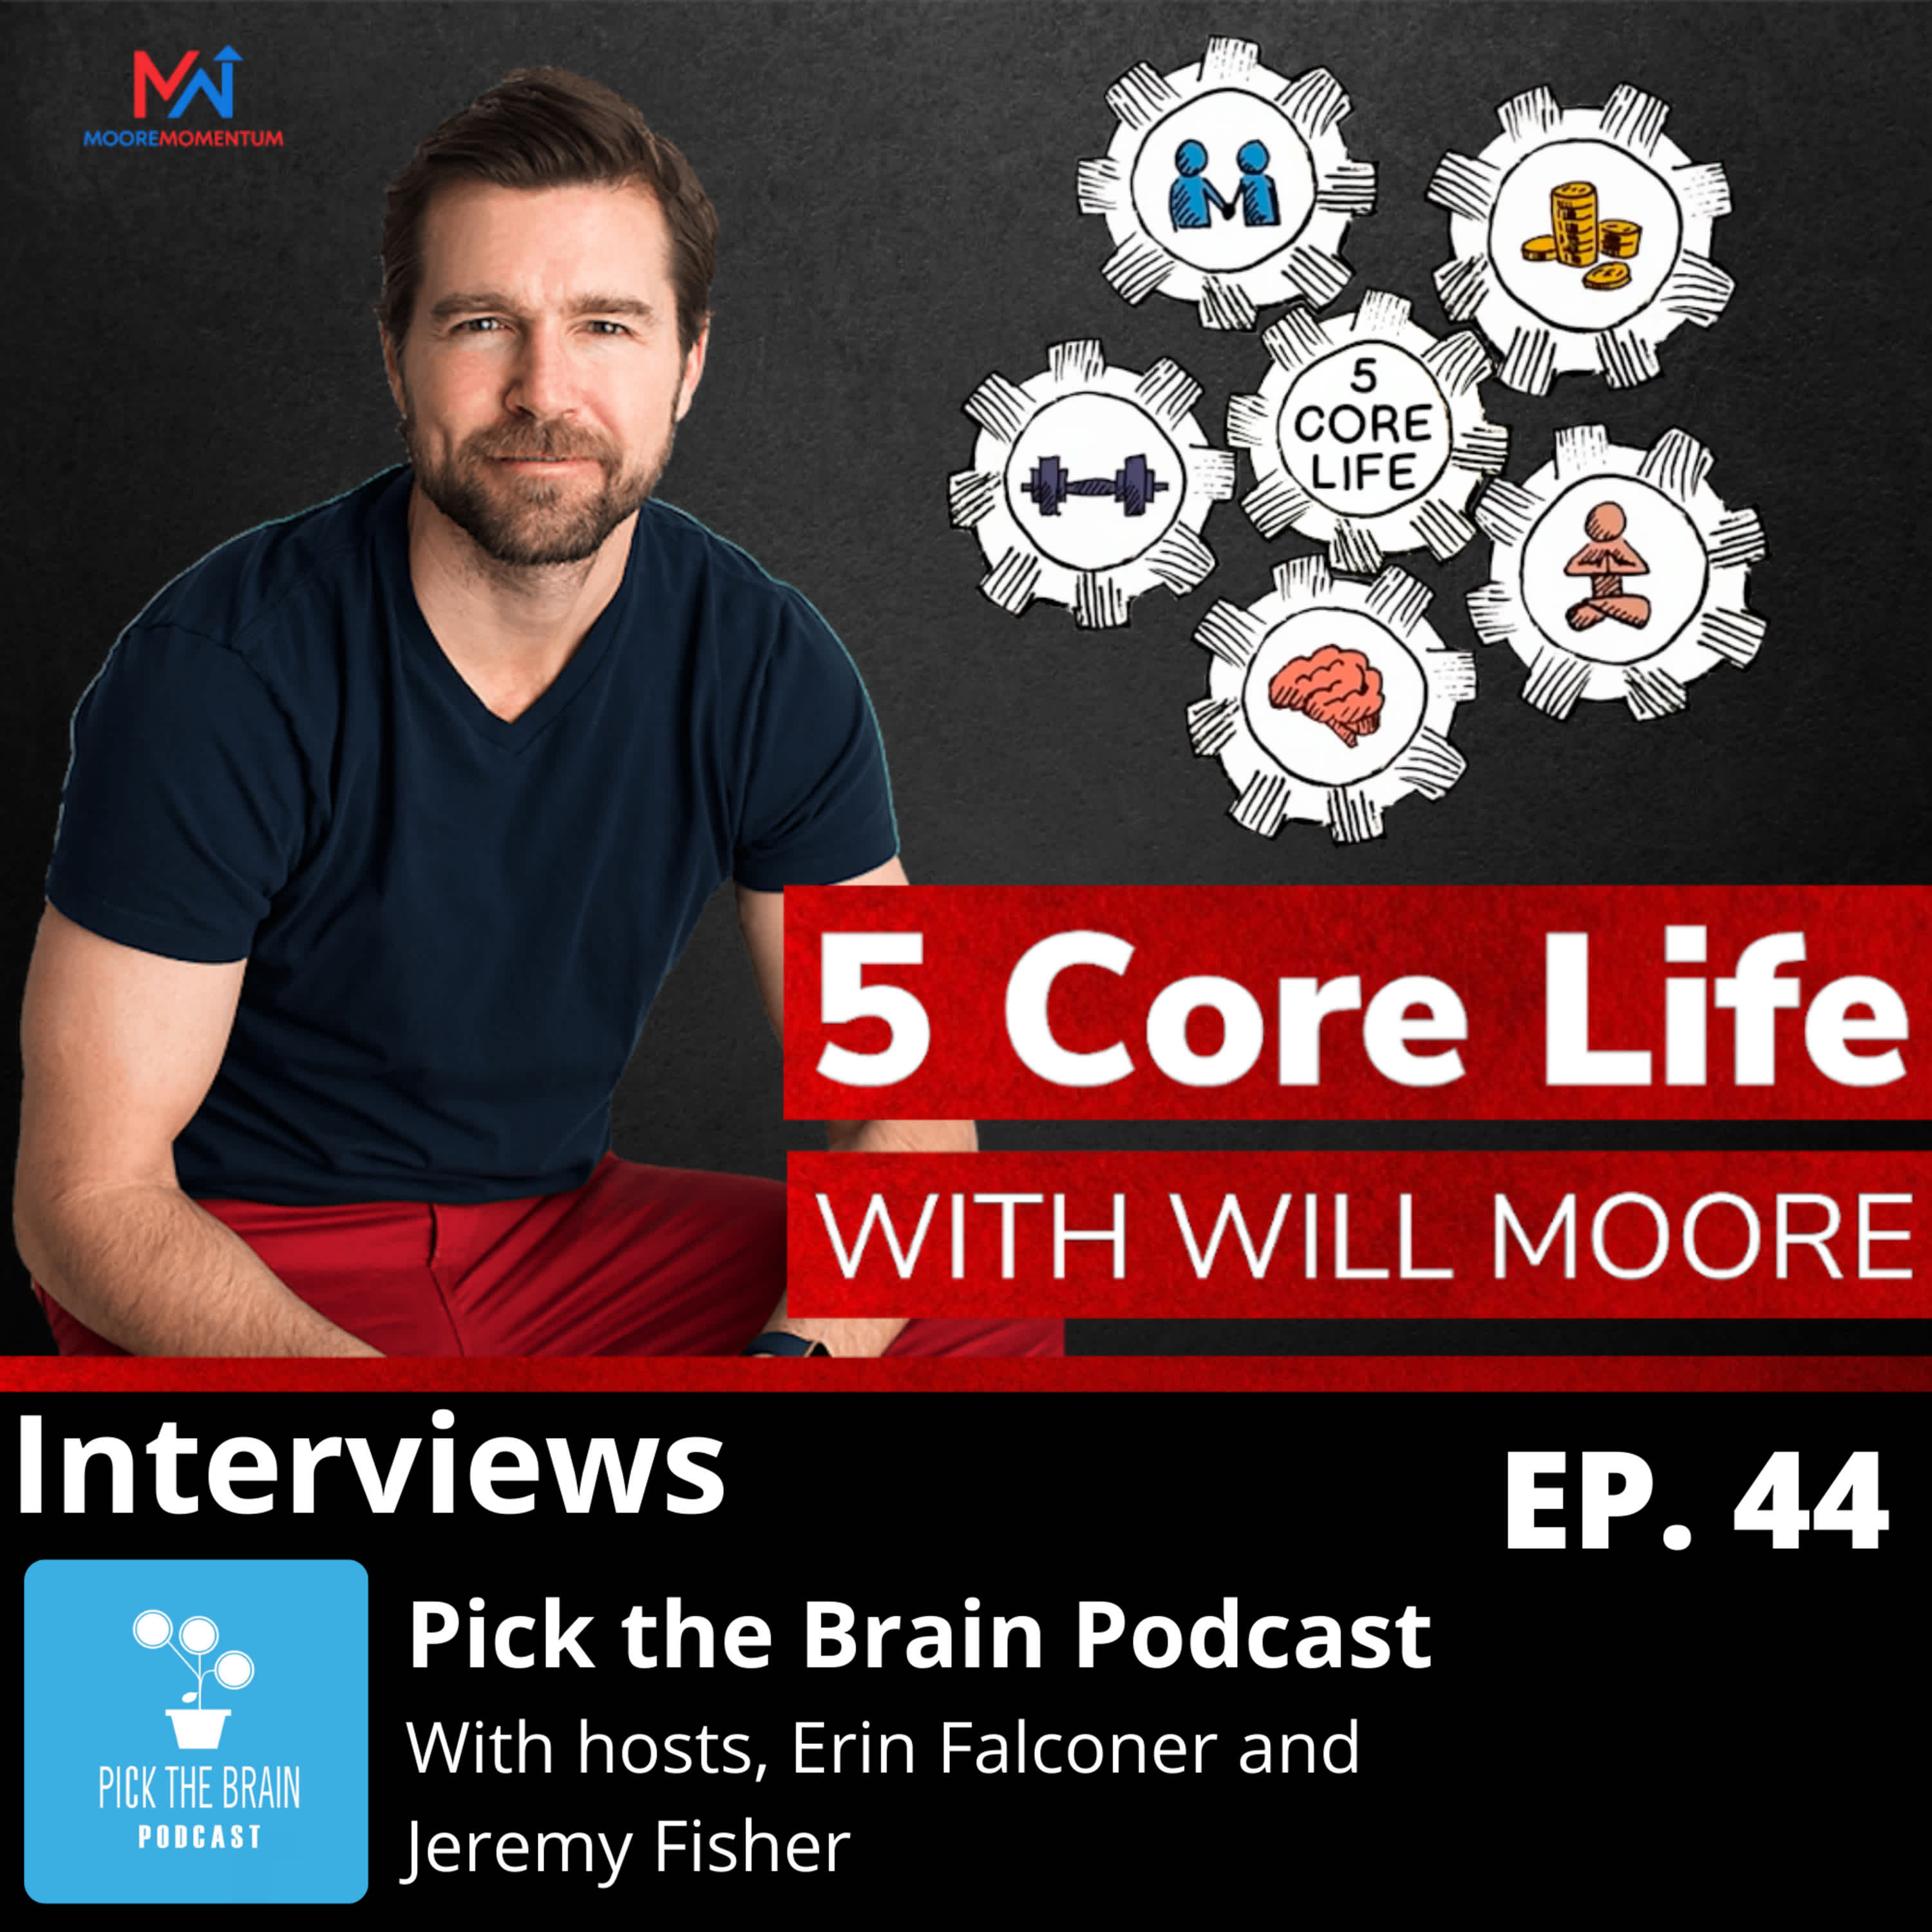 Will Moore - Introducing the 5 Cores on The Pick The Brain Podcast